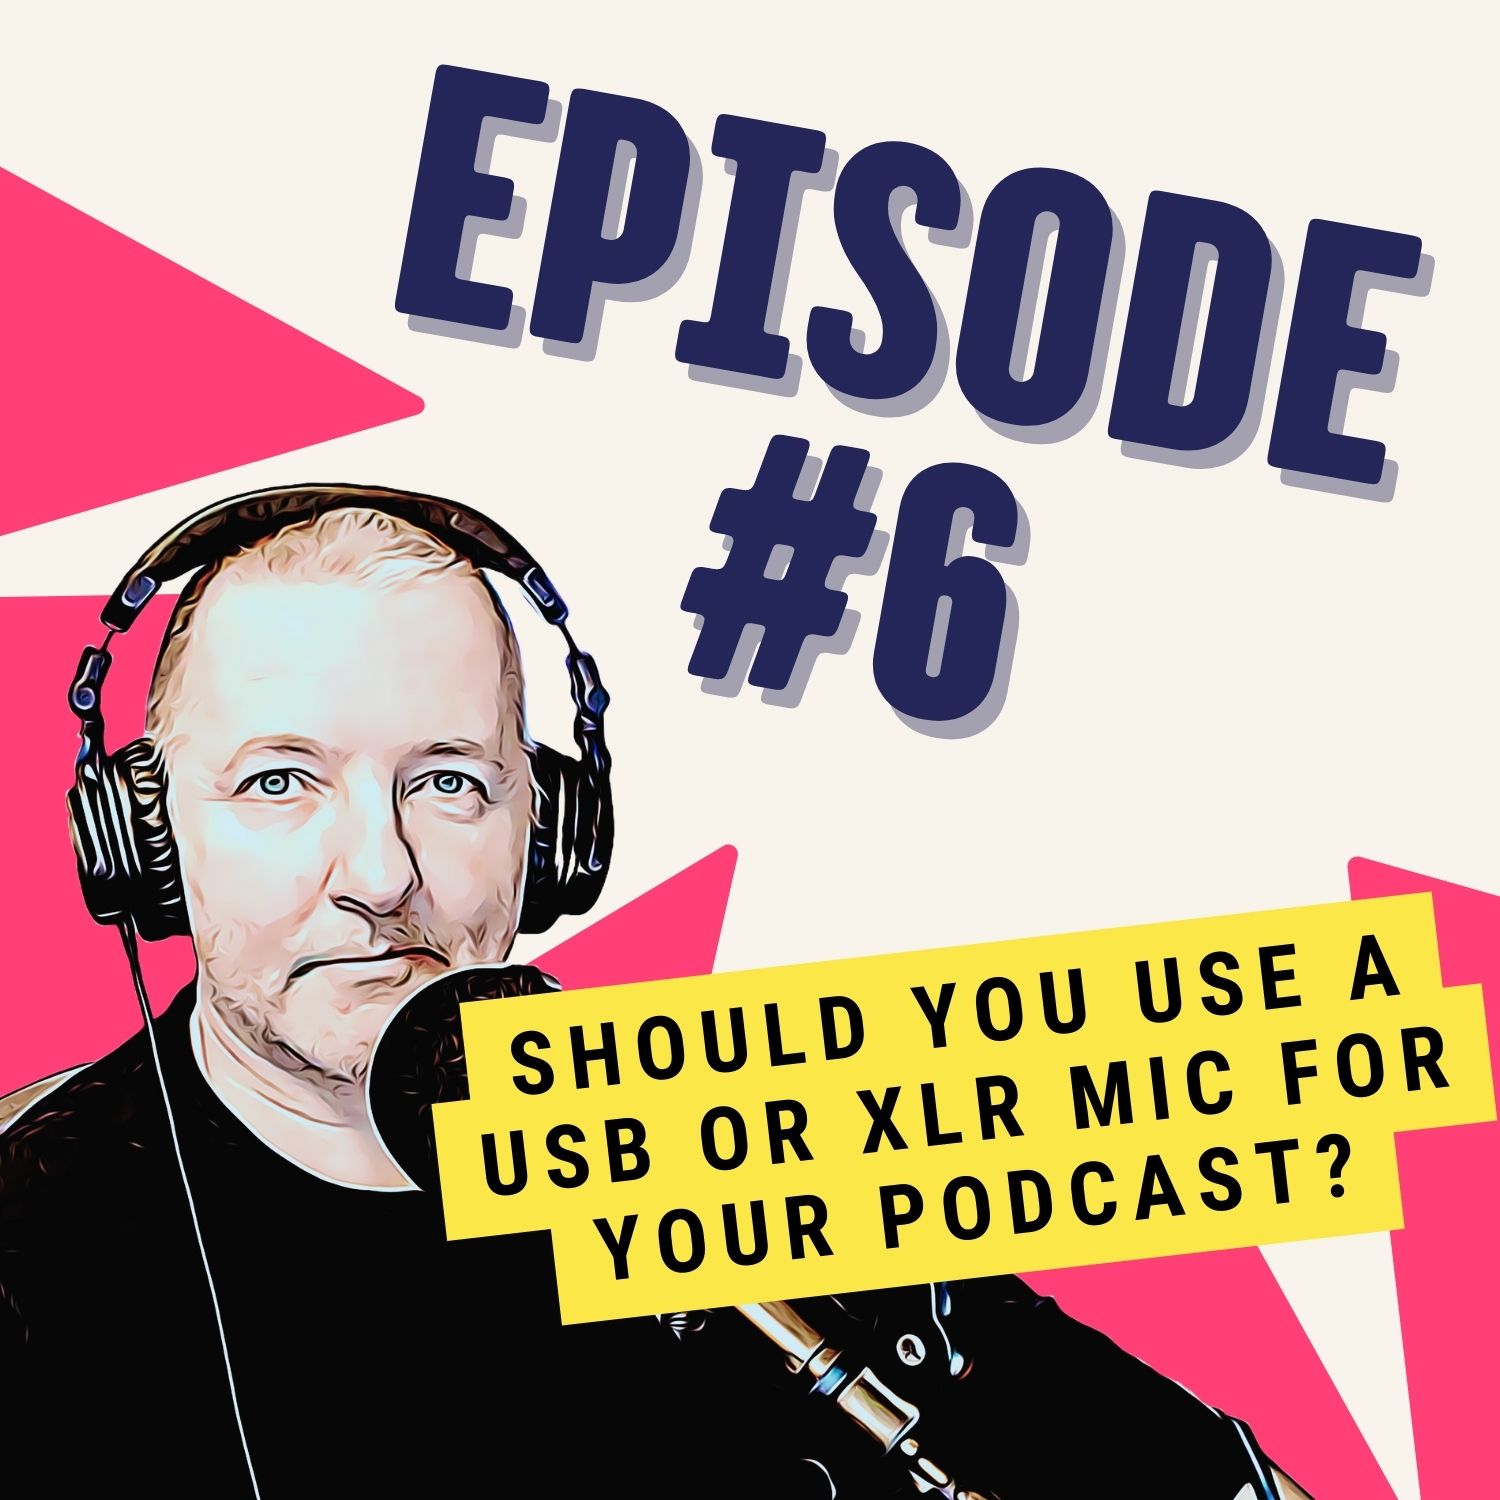 Should You Use a USB or XLR Microphone for Your Podcast?